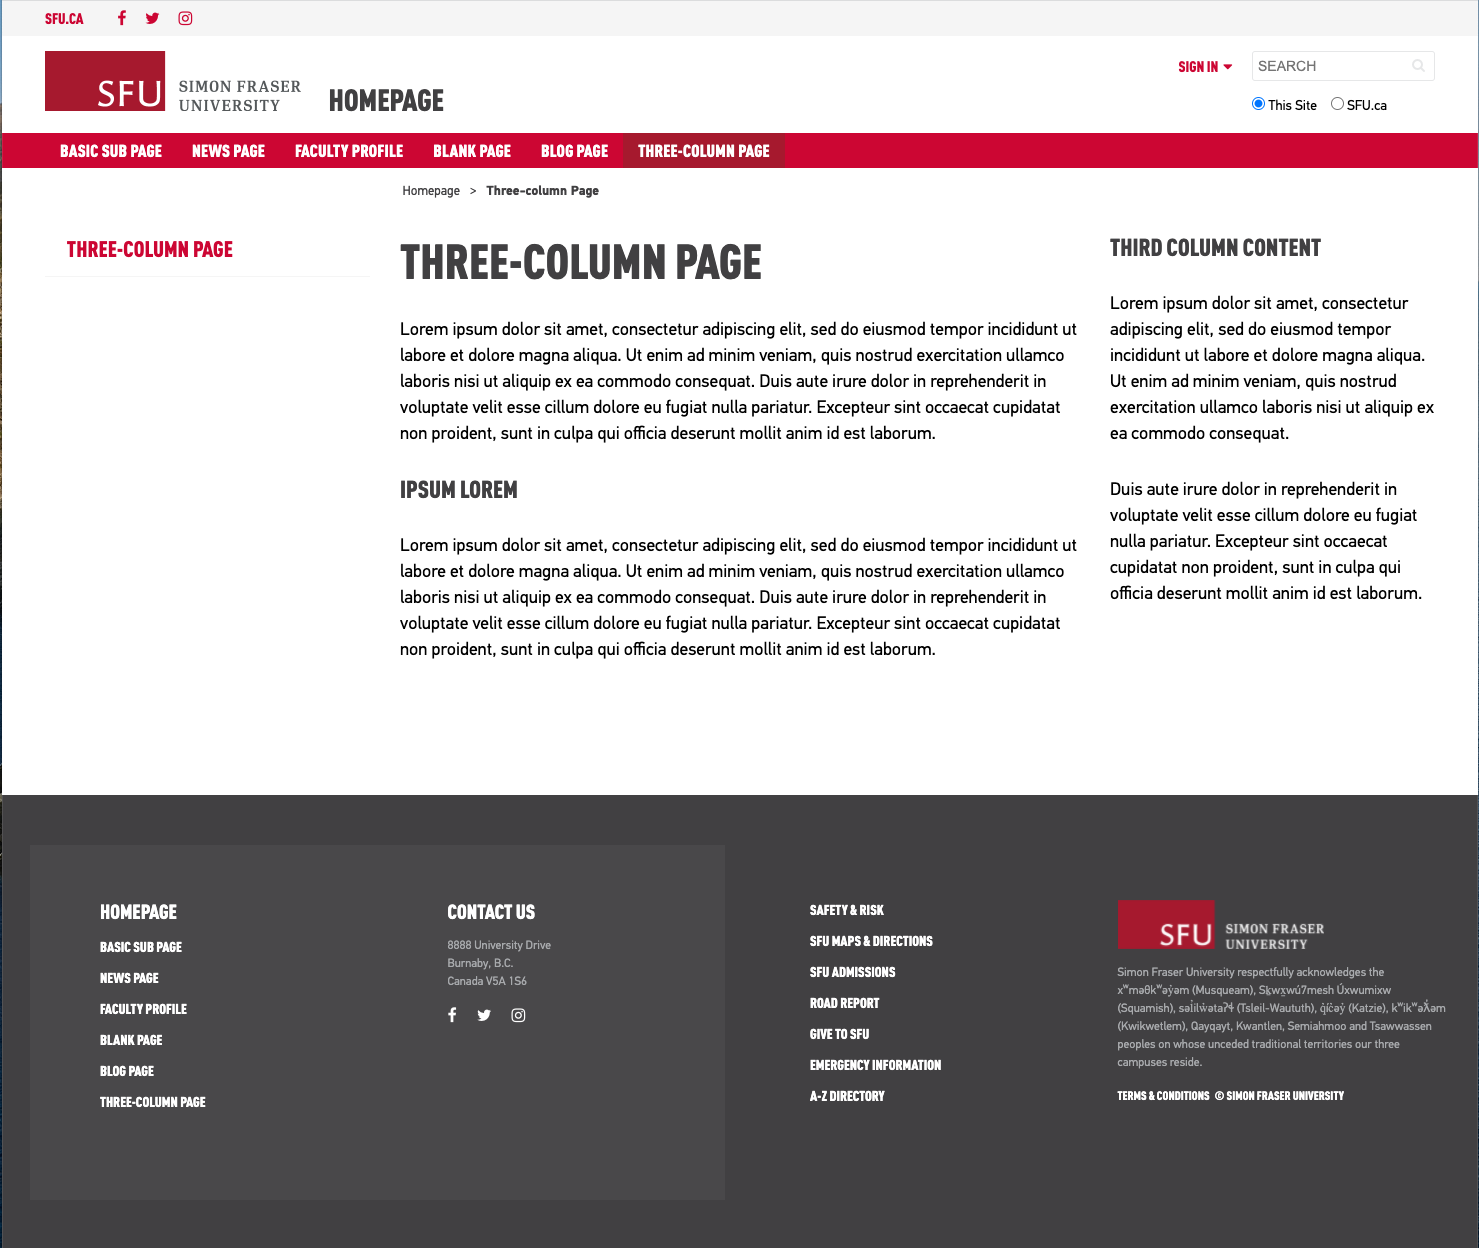 This is an image of a three-column page example